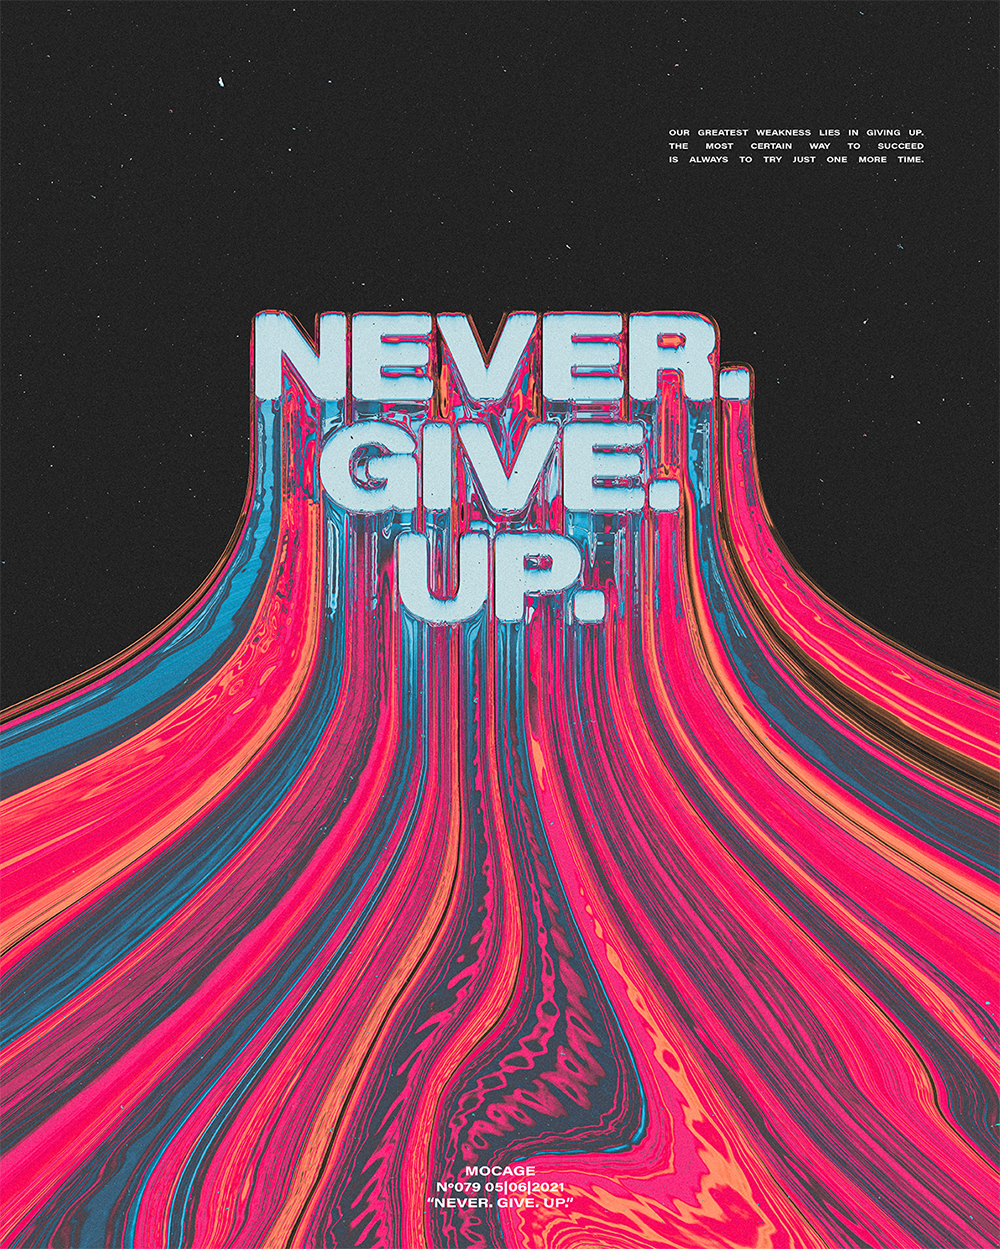 “Never give up”